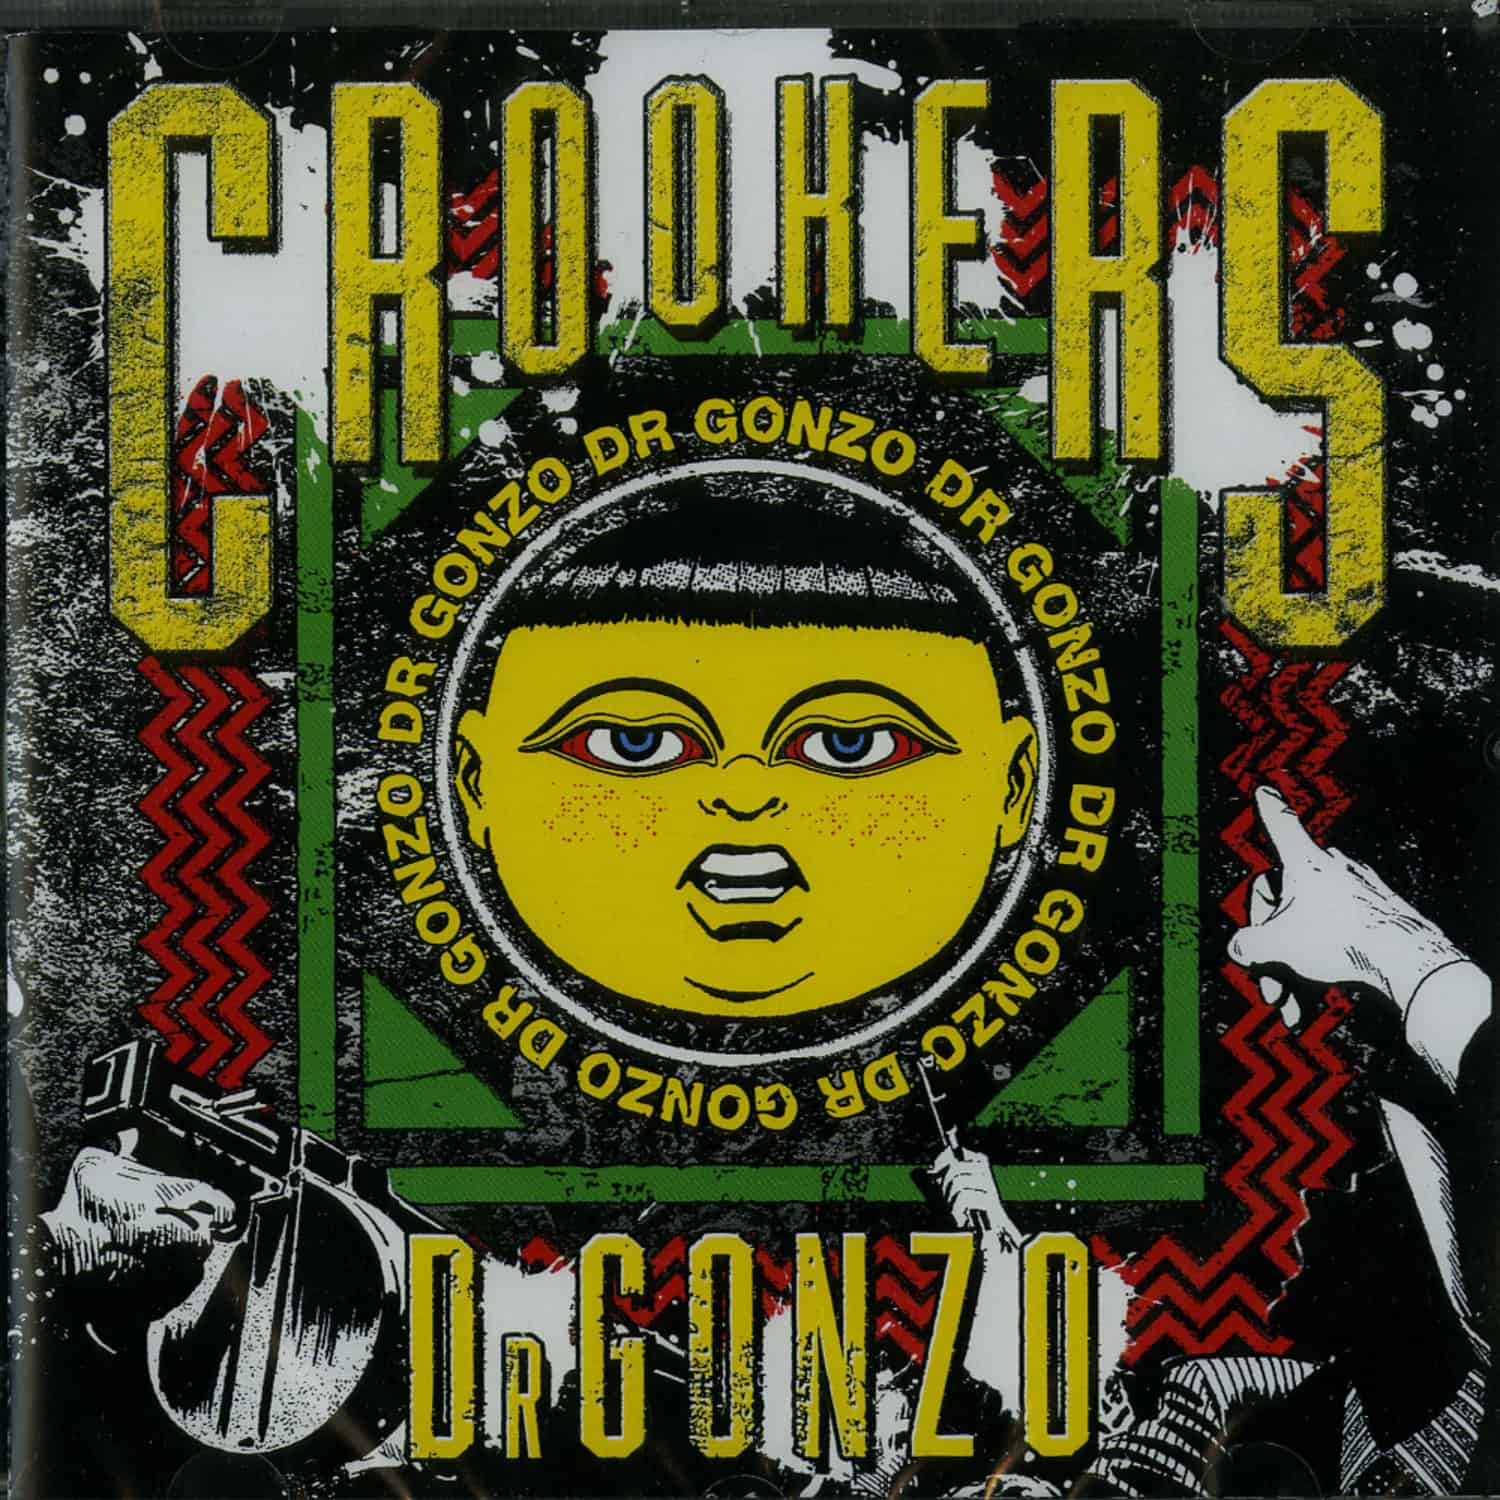 Crookers - DR GONZO 